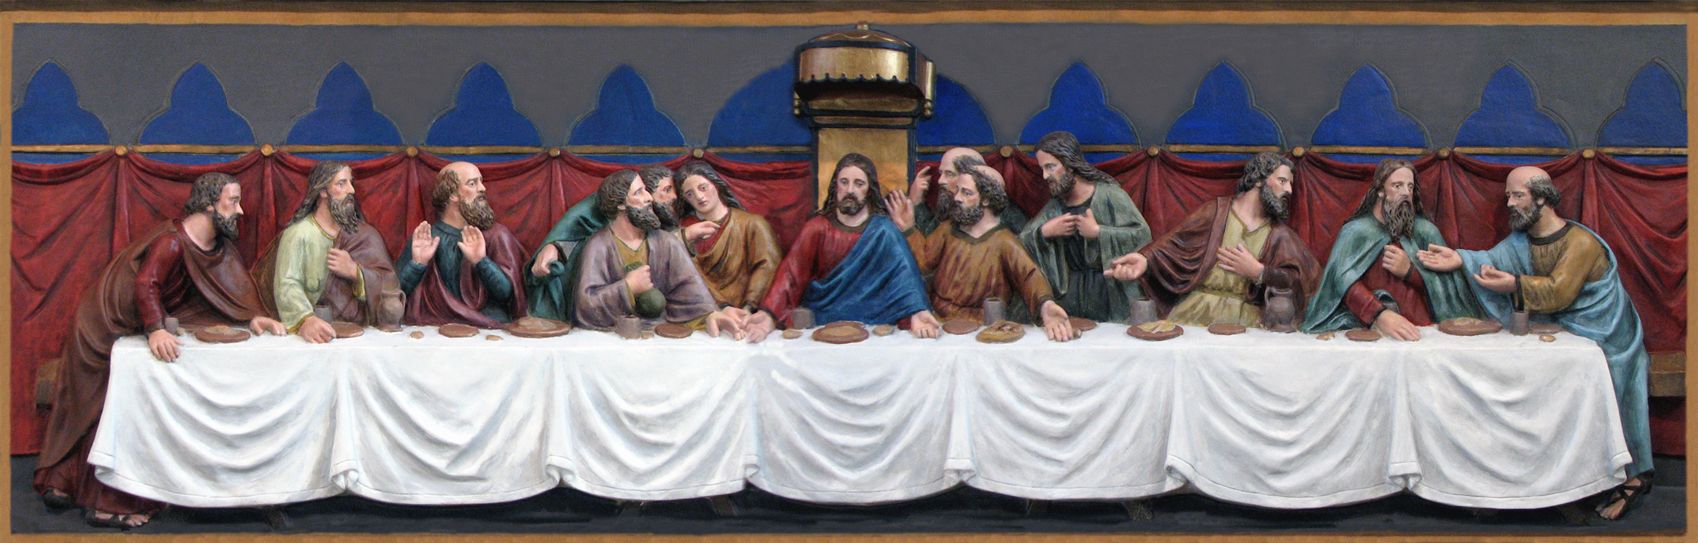 Lady Chapel Reredos 'The Last Supper'A